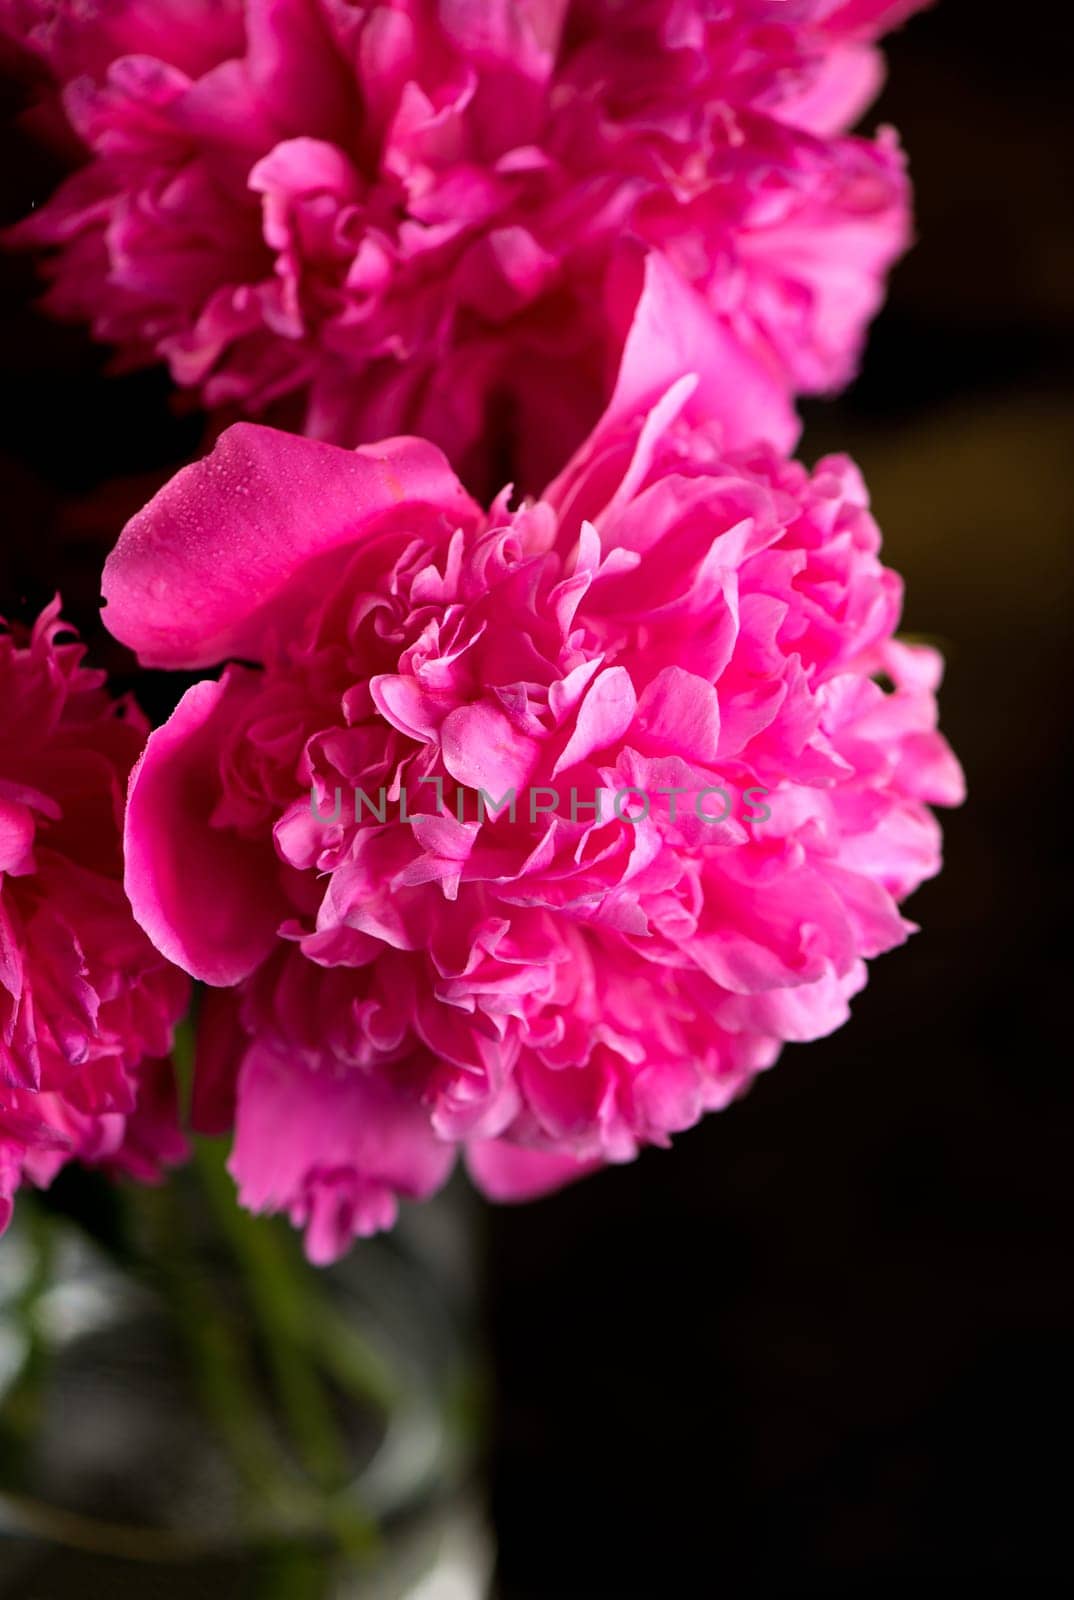 Pink floral background. Background bouquet of beautiful pink peonies. Blooming peony flowers, close-up. Wedding background, Valentine's day concept. Blossom, flower close-up by aprilphoto